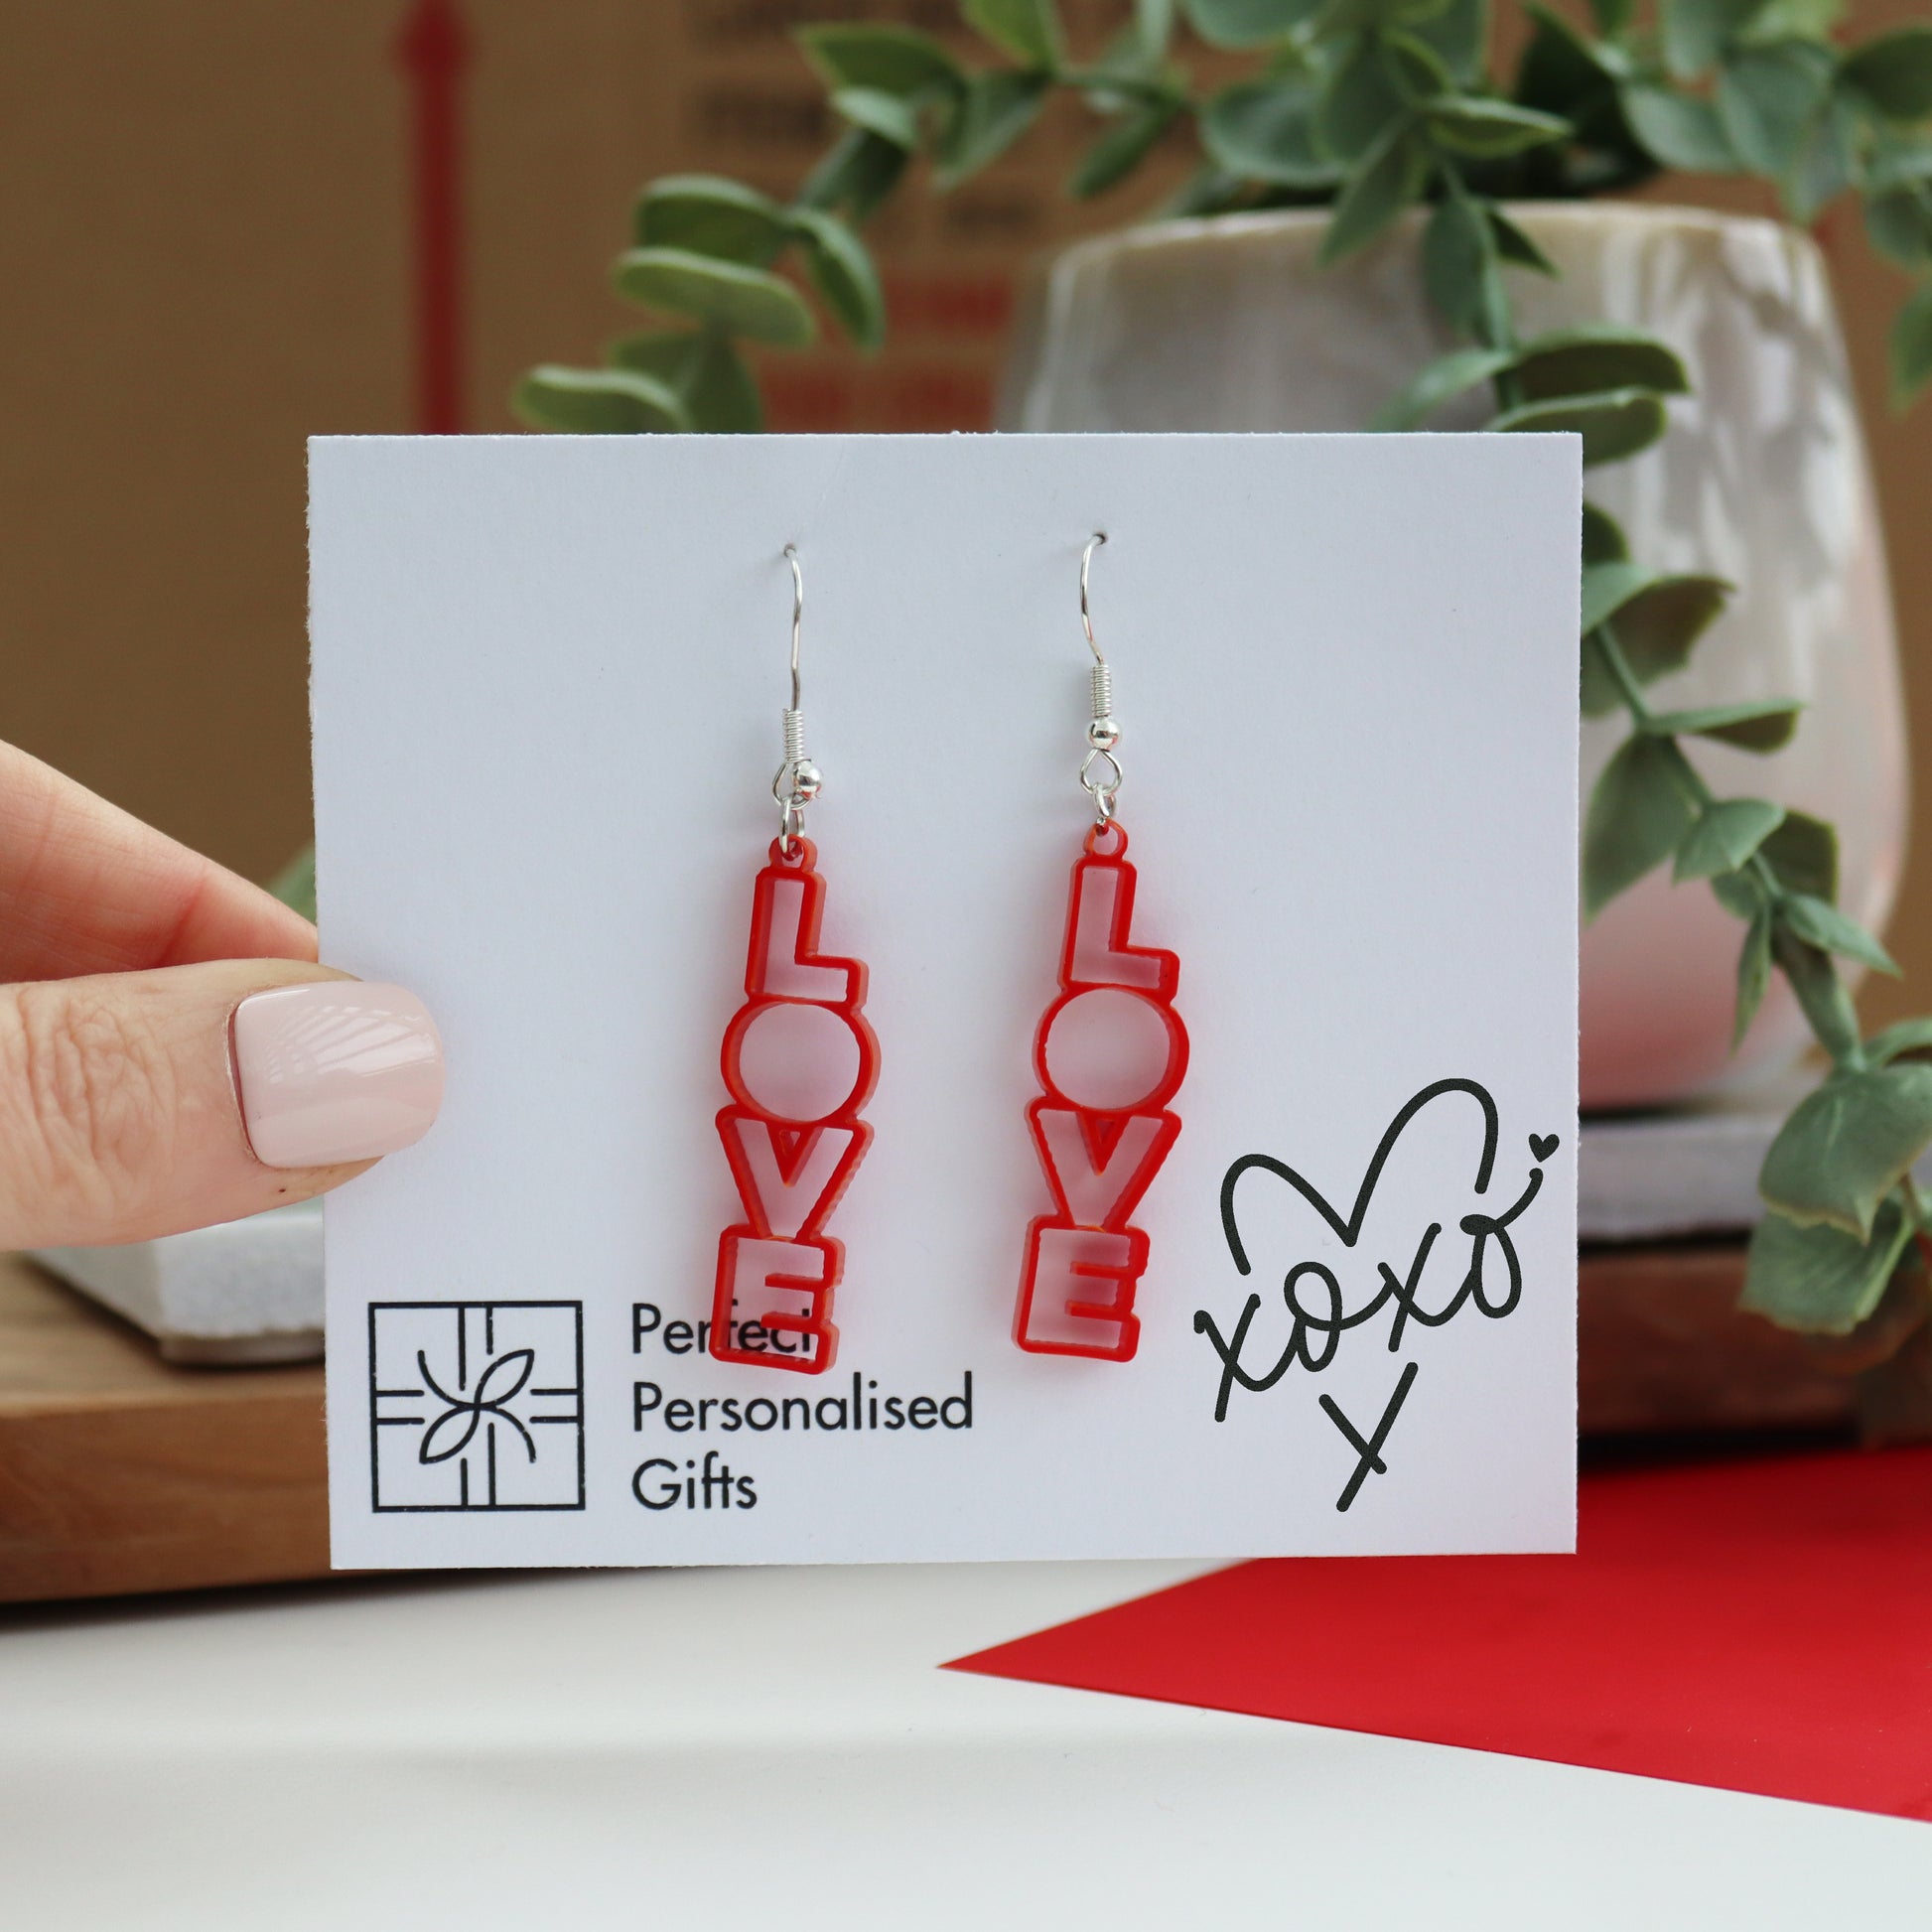 Valentines Day Gnome Earring Kit - Jewelry Making Kit – Too Cute Beads